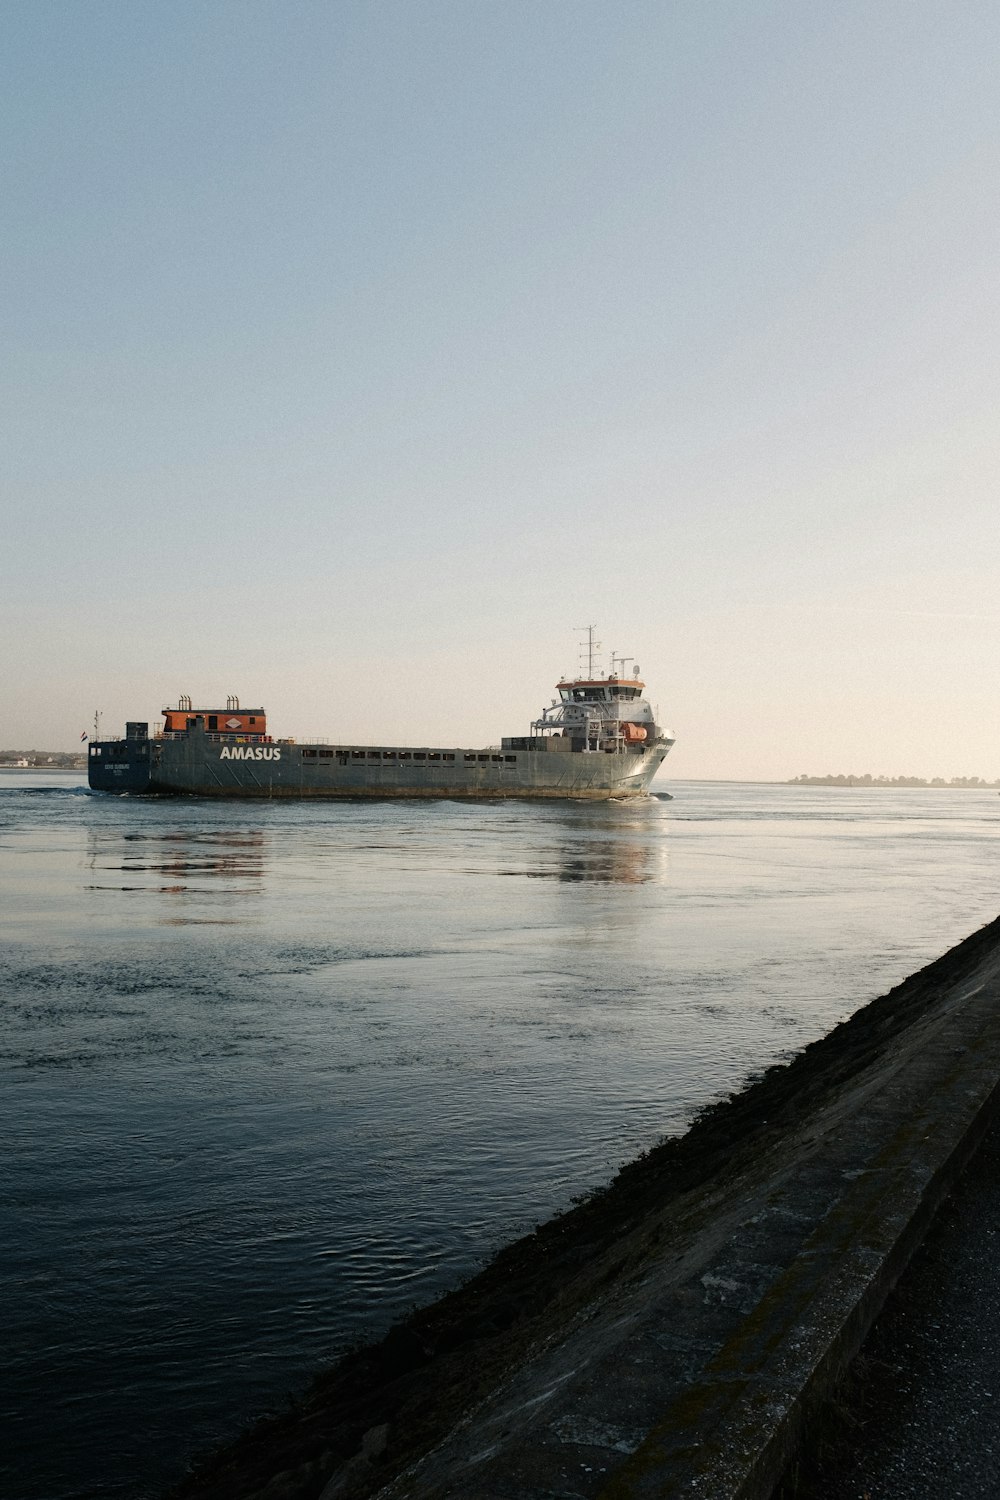 a large cargo ship in the middle of a body of water